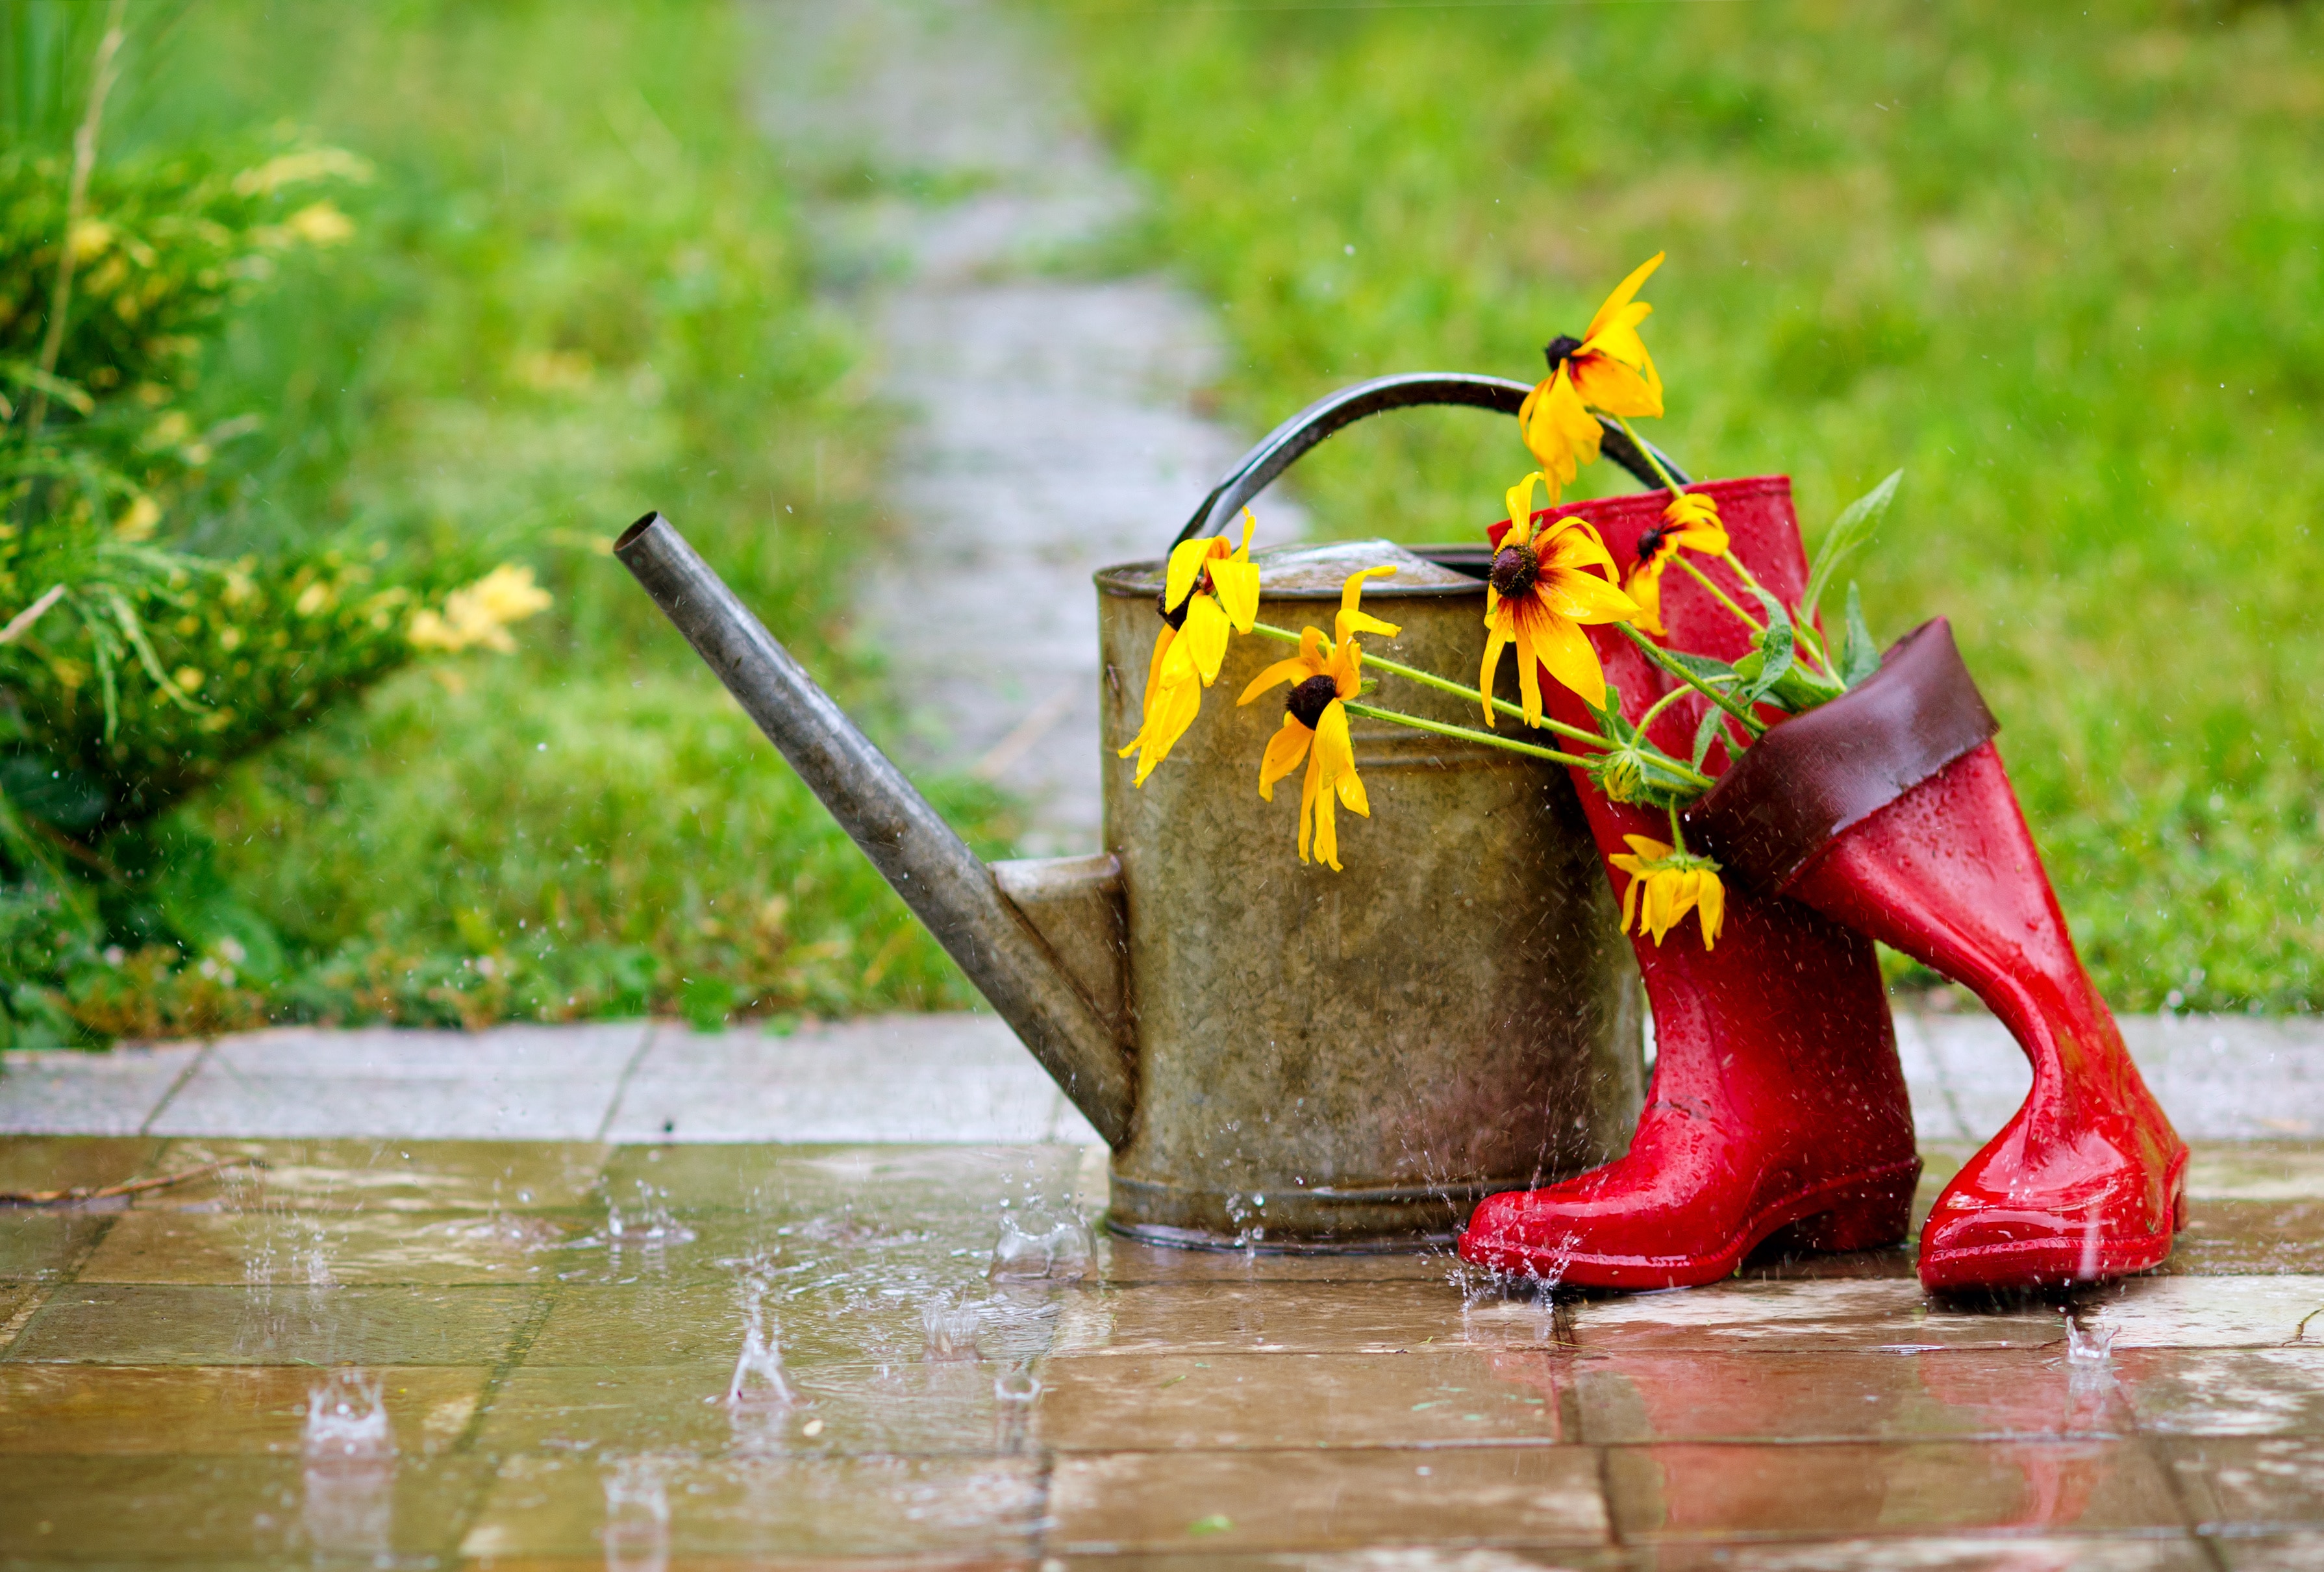 Red rain boots, watering can and flowers in spring garden